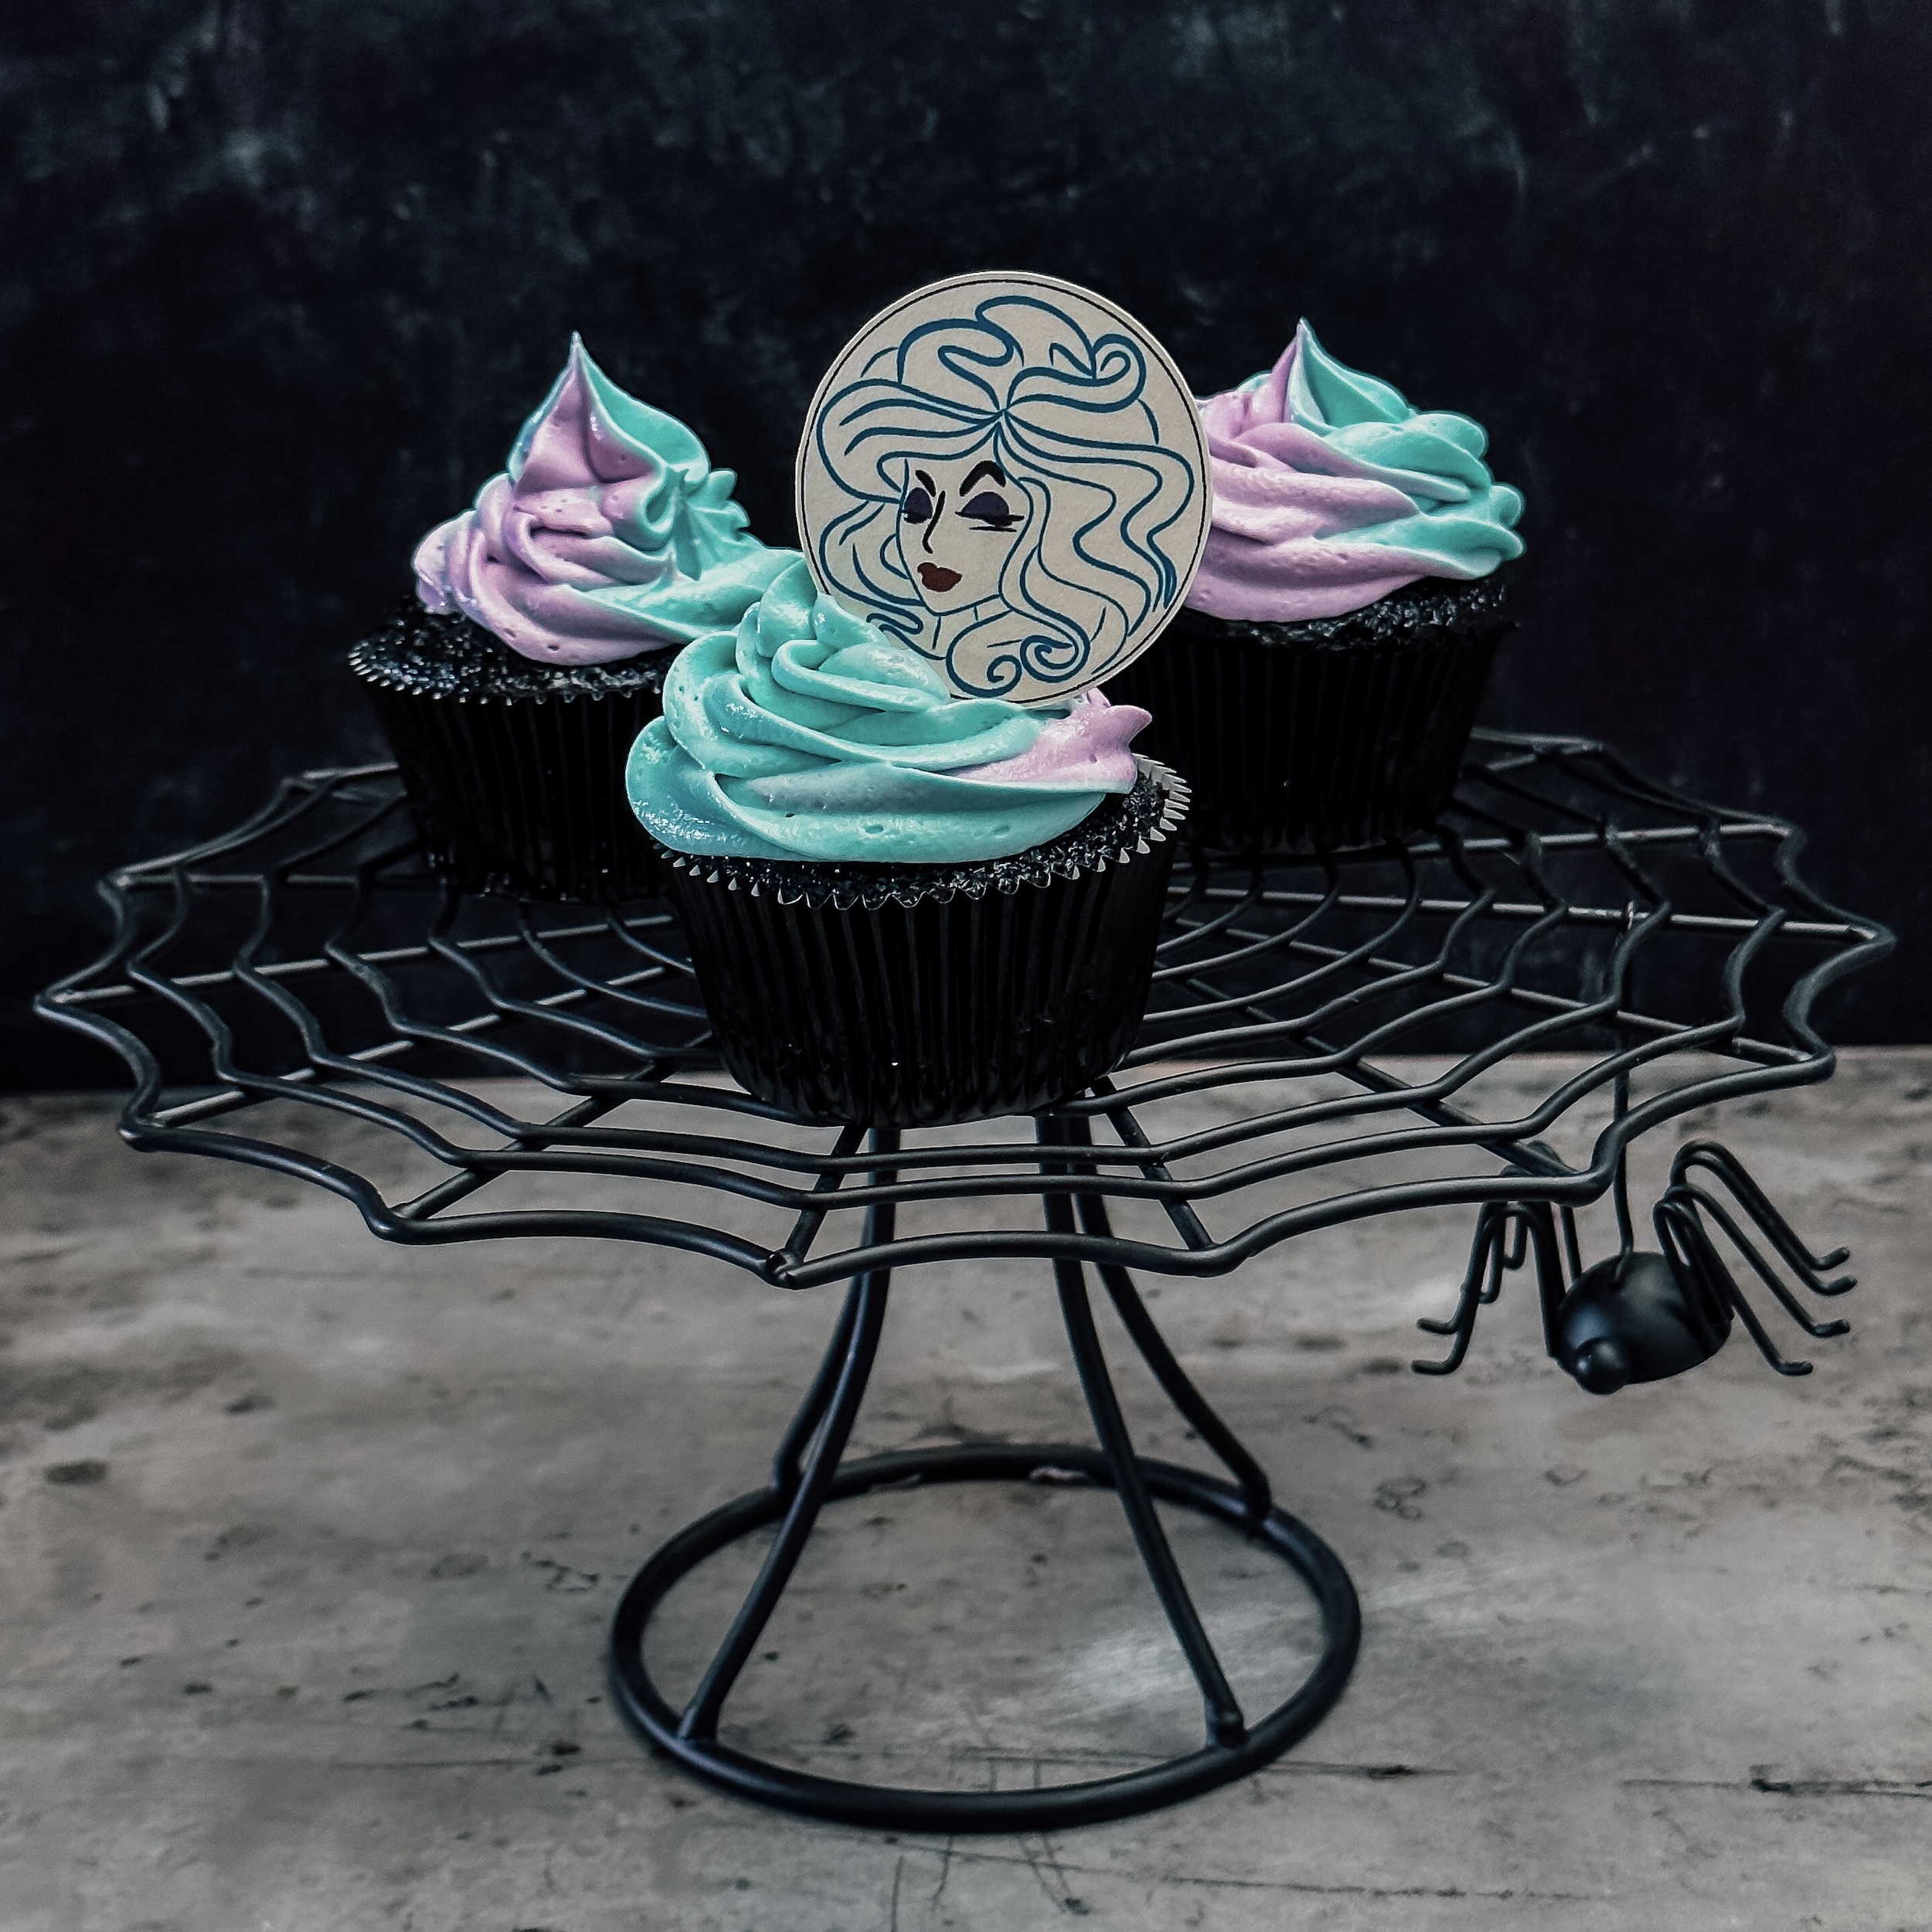 Madame Leota Cupcakes (three black chocolate cupcakes with a swirl of blue and purple frosting and a Madame Leota decoration)